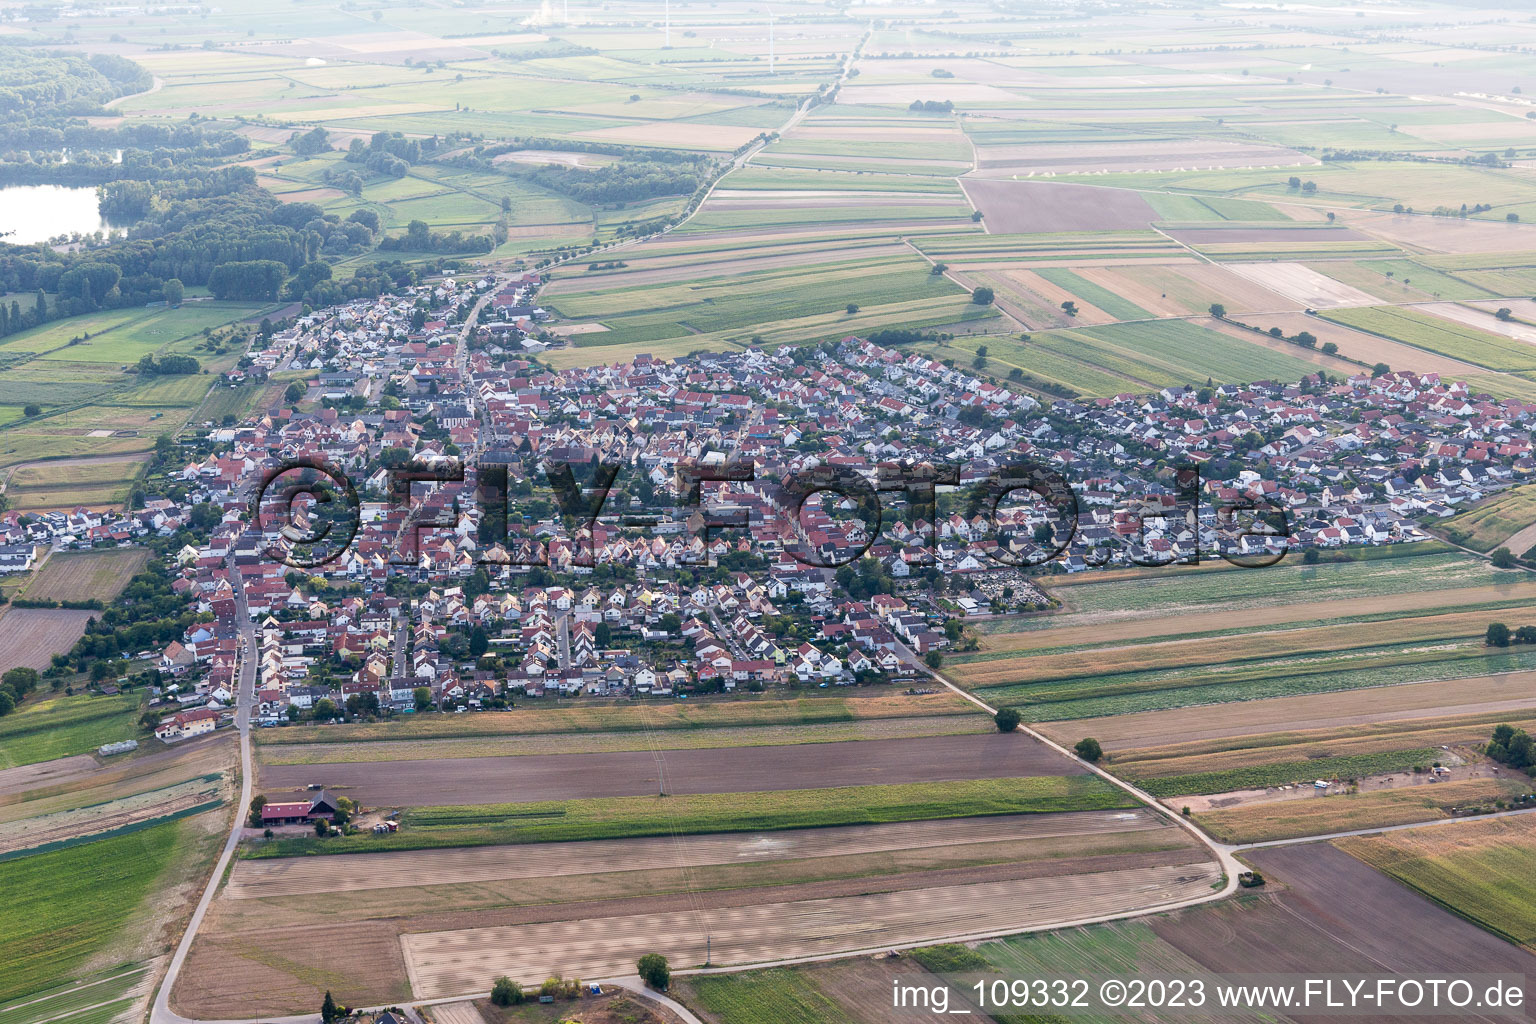 District Mechtersheim in Römerberg in the state Rhineland-Palatinate, Germany from the plane